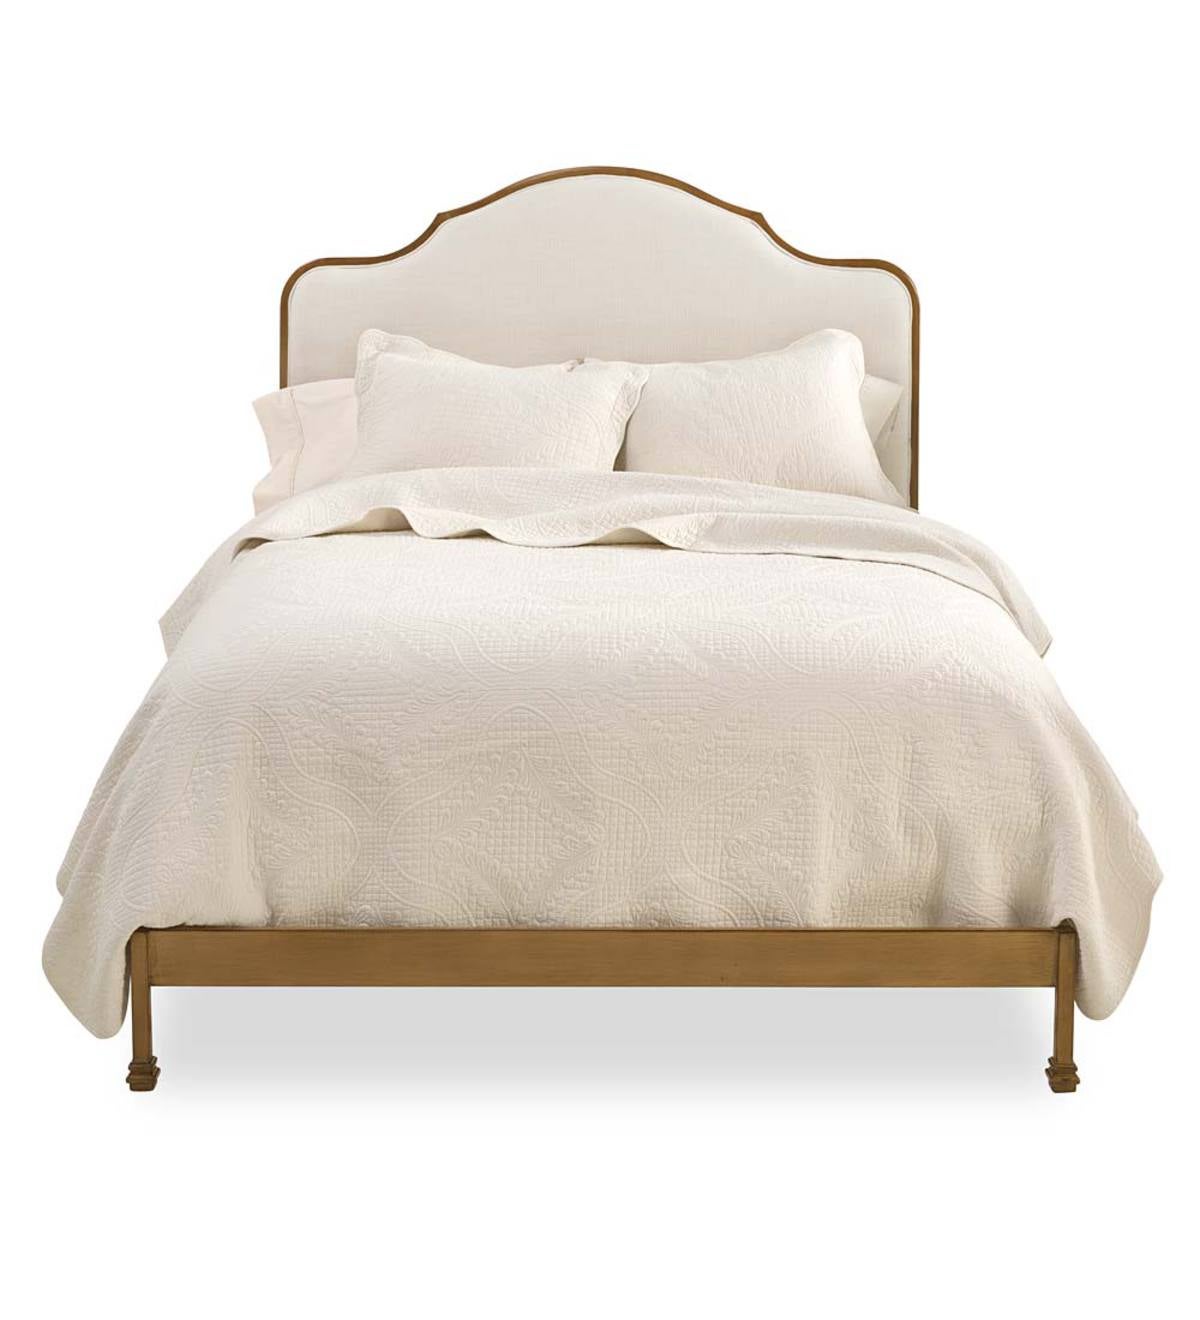 Alexa King Bed With Upholstered, Country Style King Bed Frames With Headboard